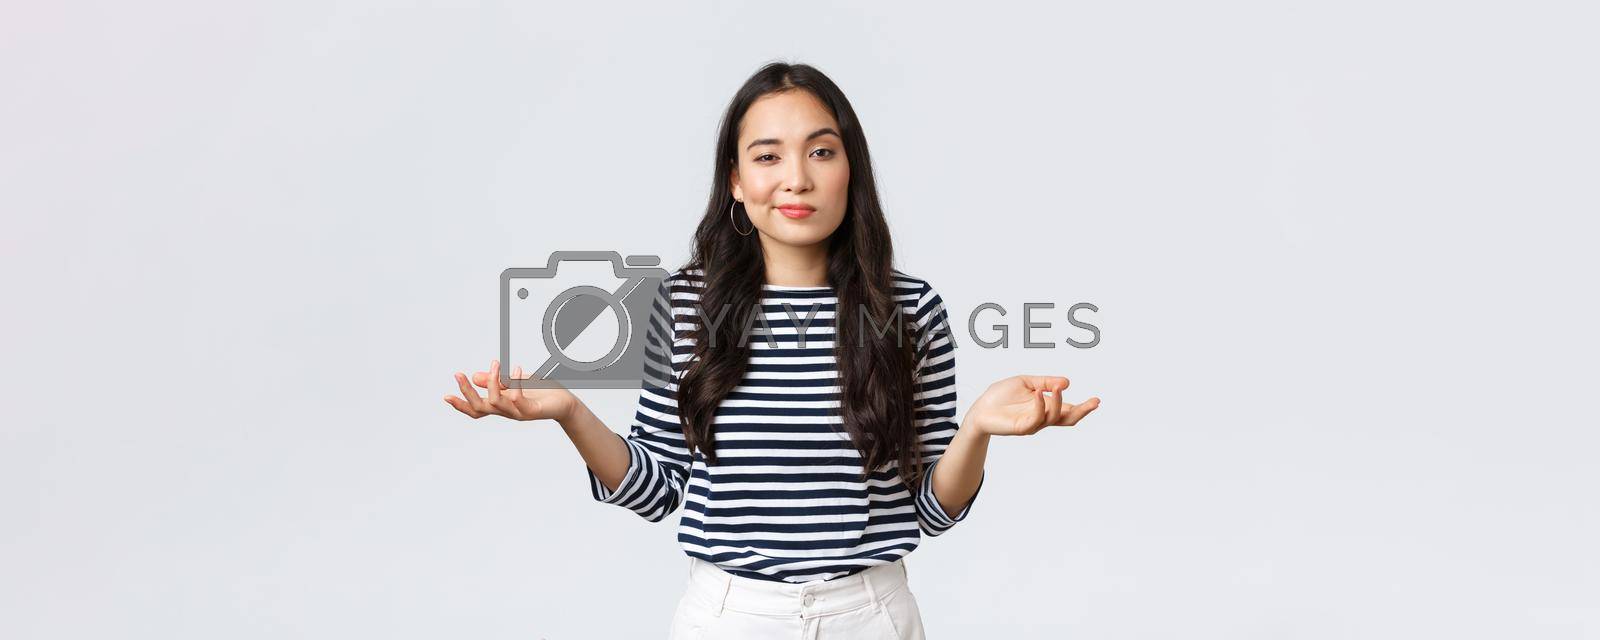 Lifestyle, beauty and fashion, people emotions concept. Clueless and unbothered asian woman shrugging with hands spread sideways and unaware smirk, standing white background.